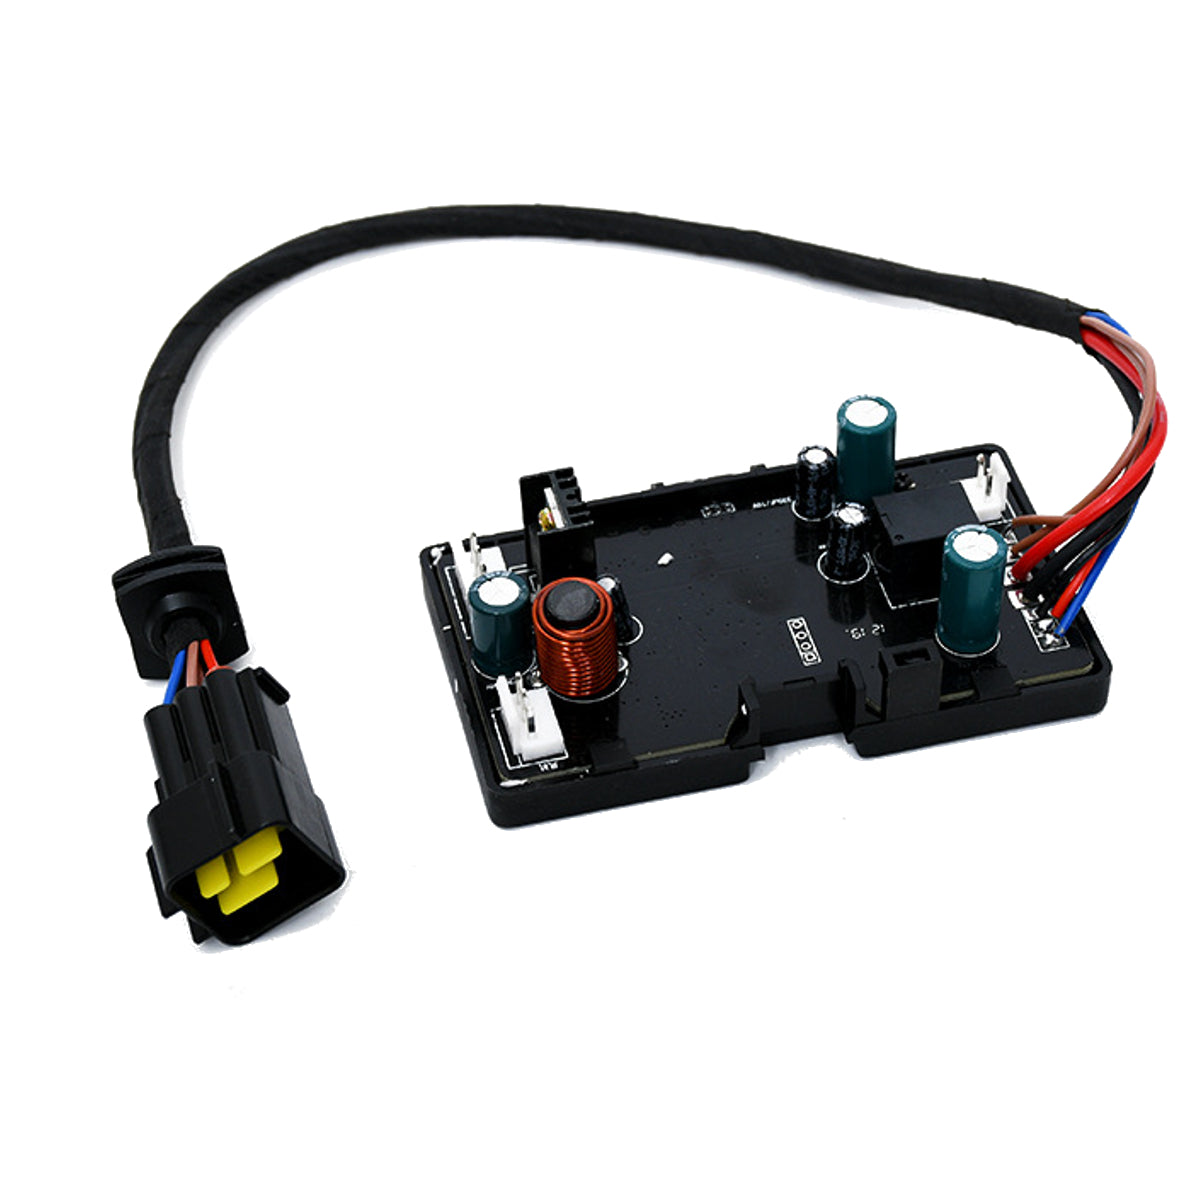 Air Diesel Parking Heater Control Board Motherboard For 12V 5-8KW Air Heater - Auto GoShop